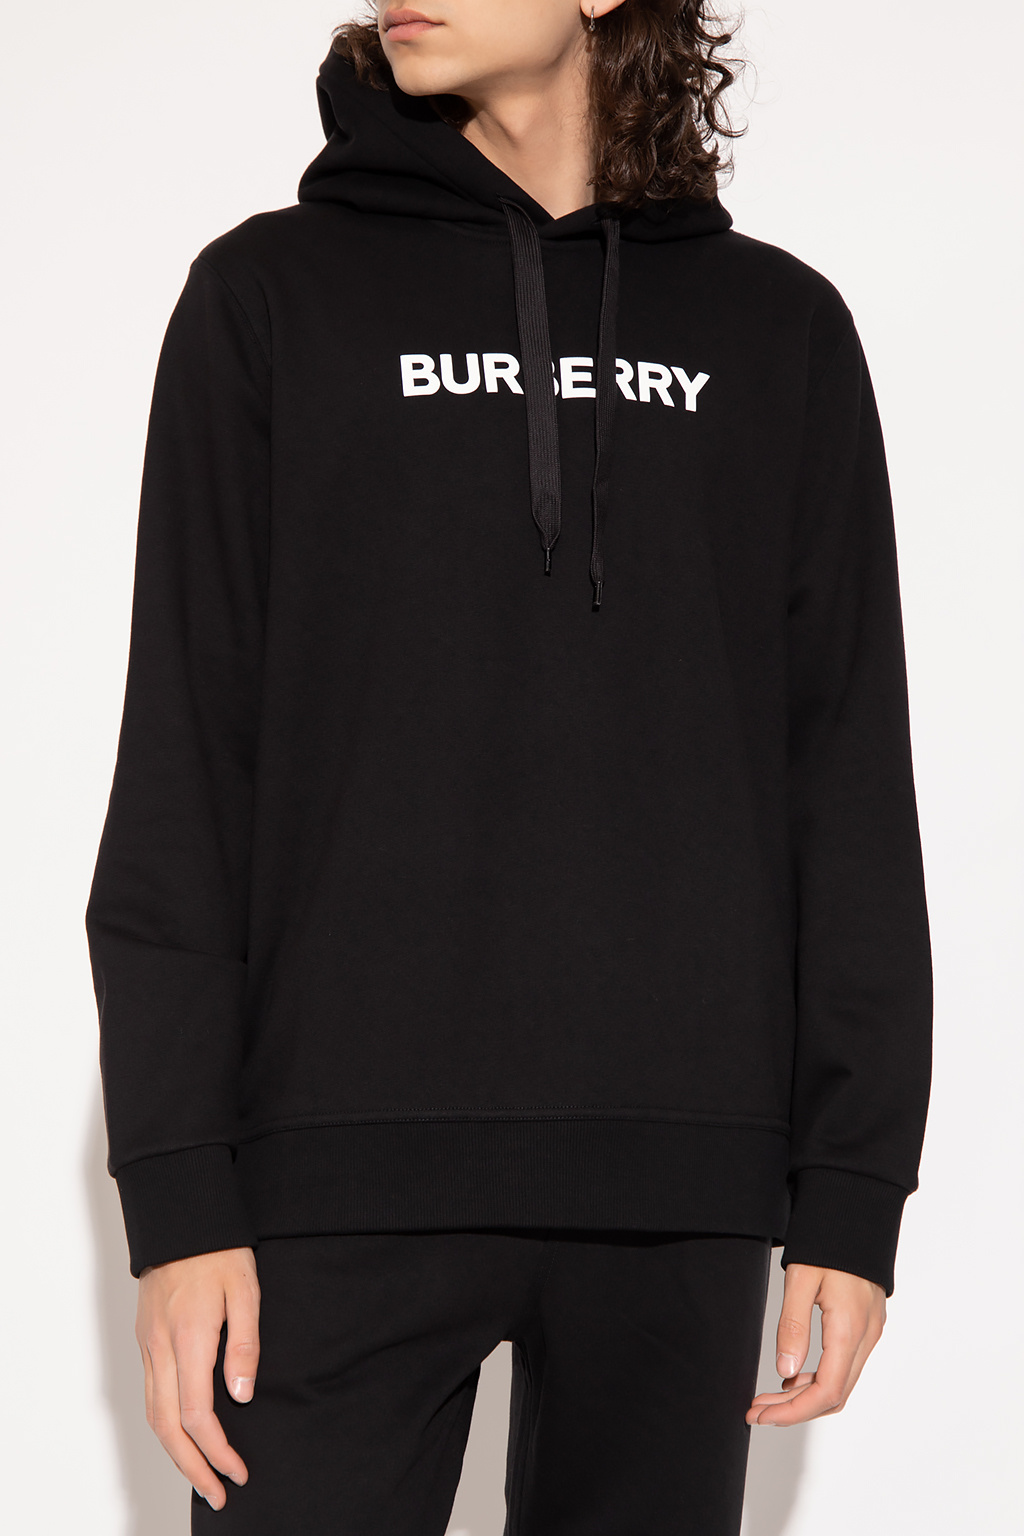 burberry Bag ‘Ansdell’ hoodie